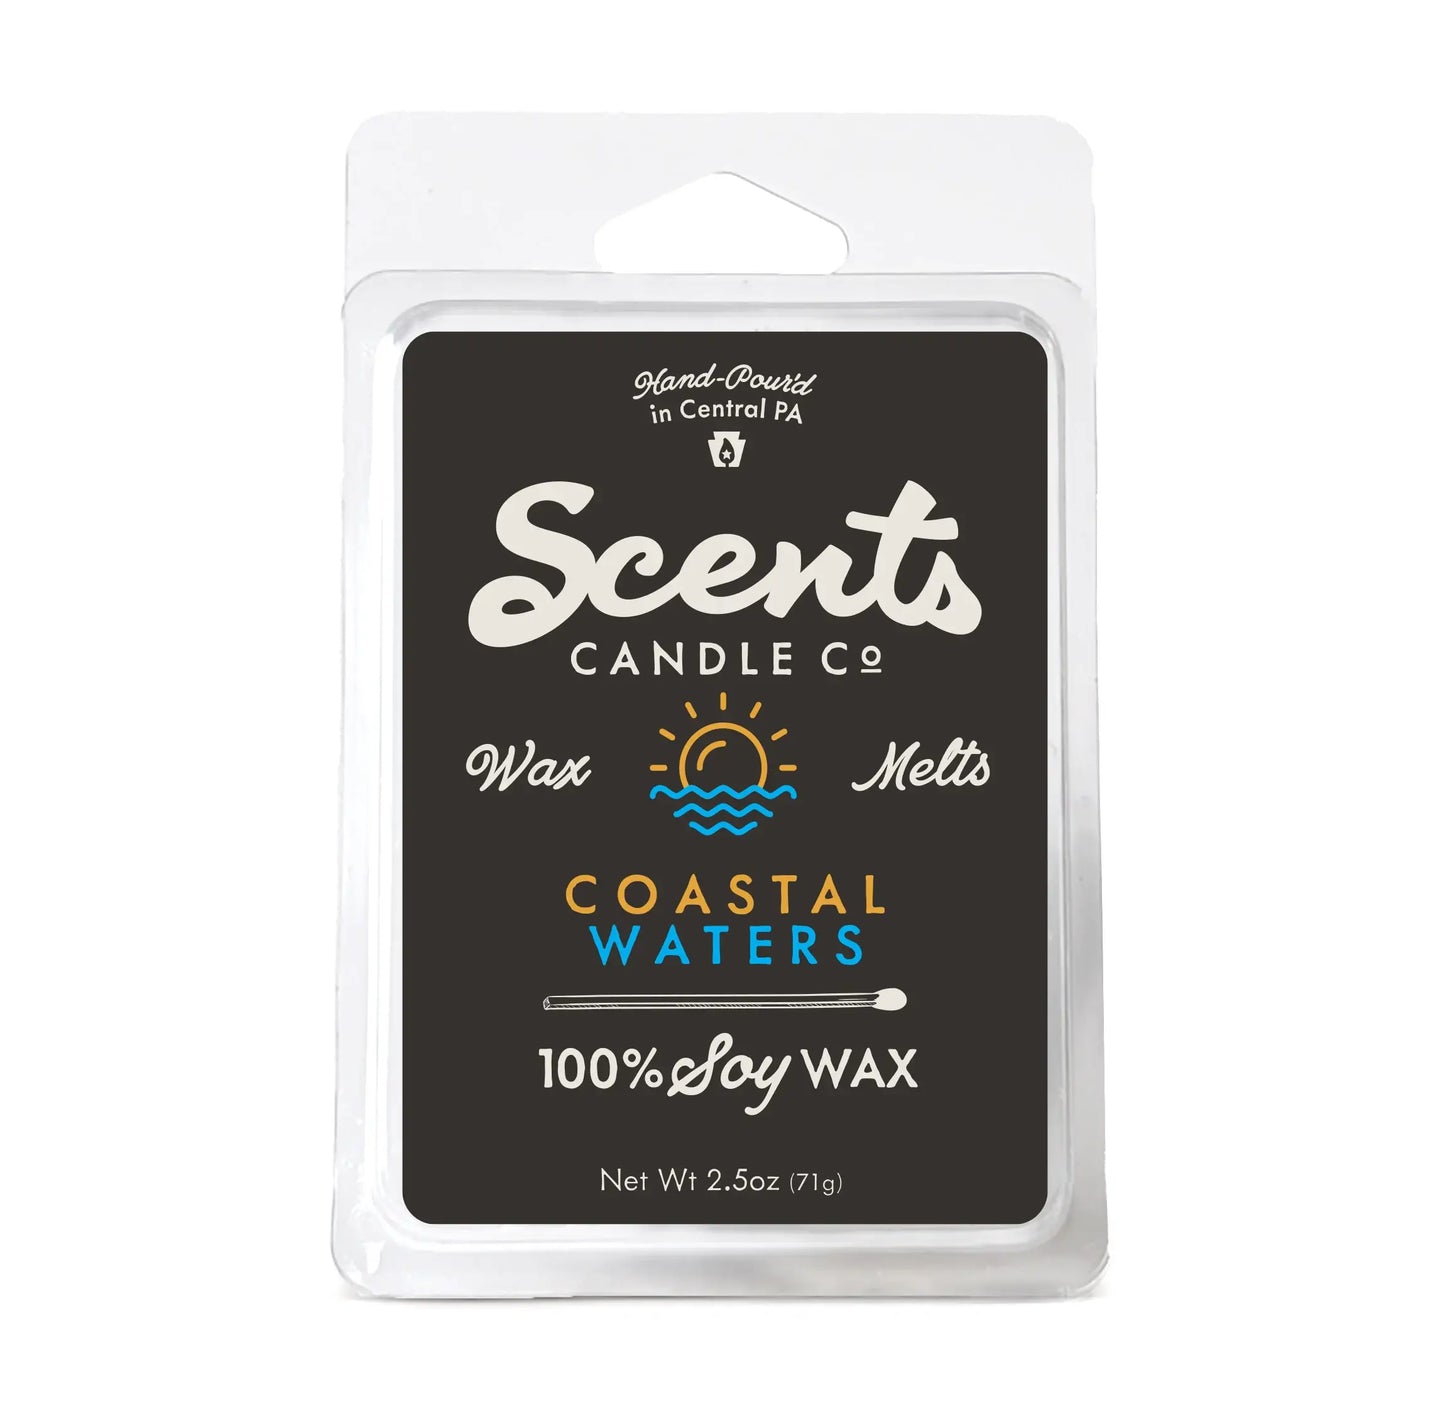 Scents Candle Co. Coastal Waters Wax Melt